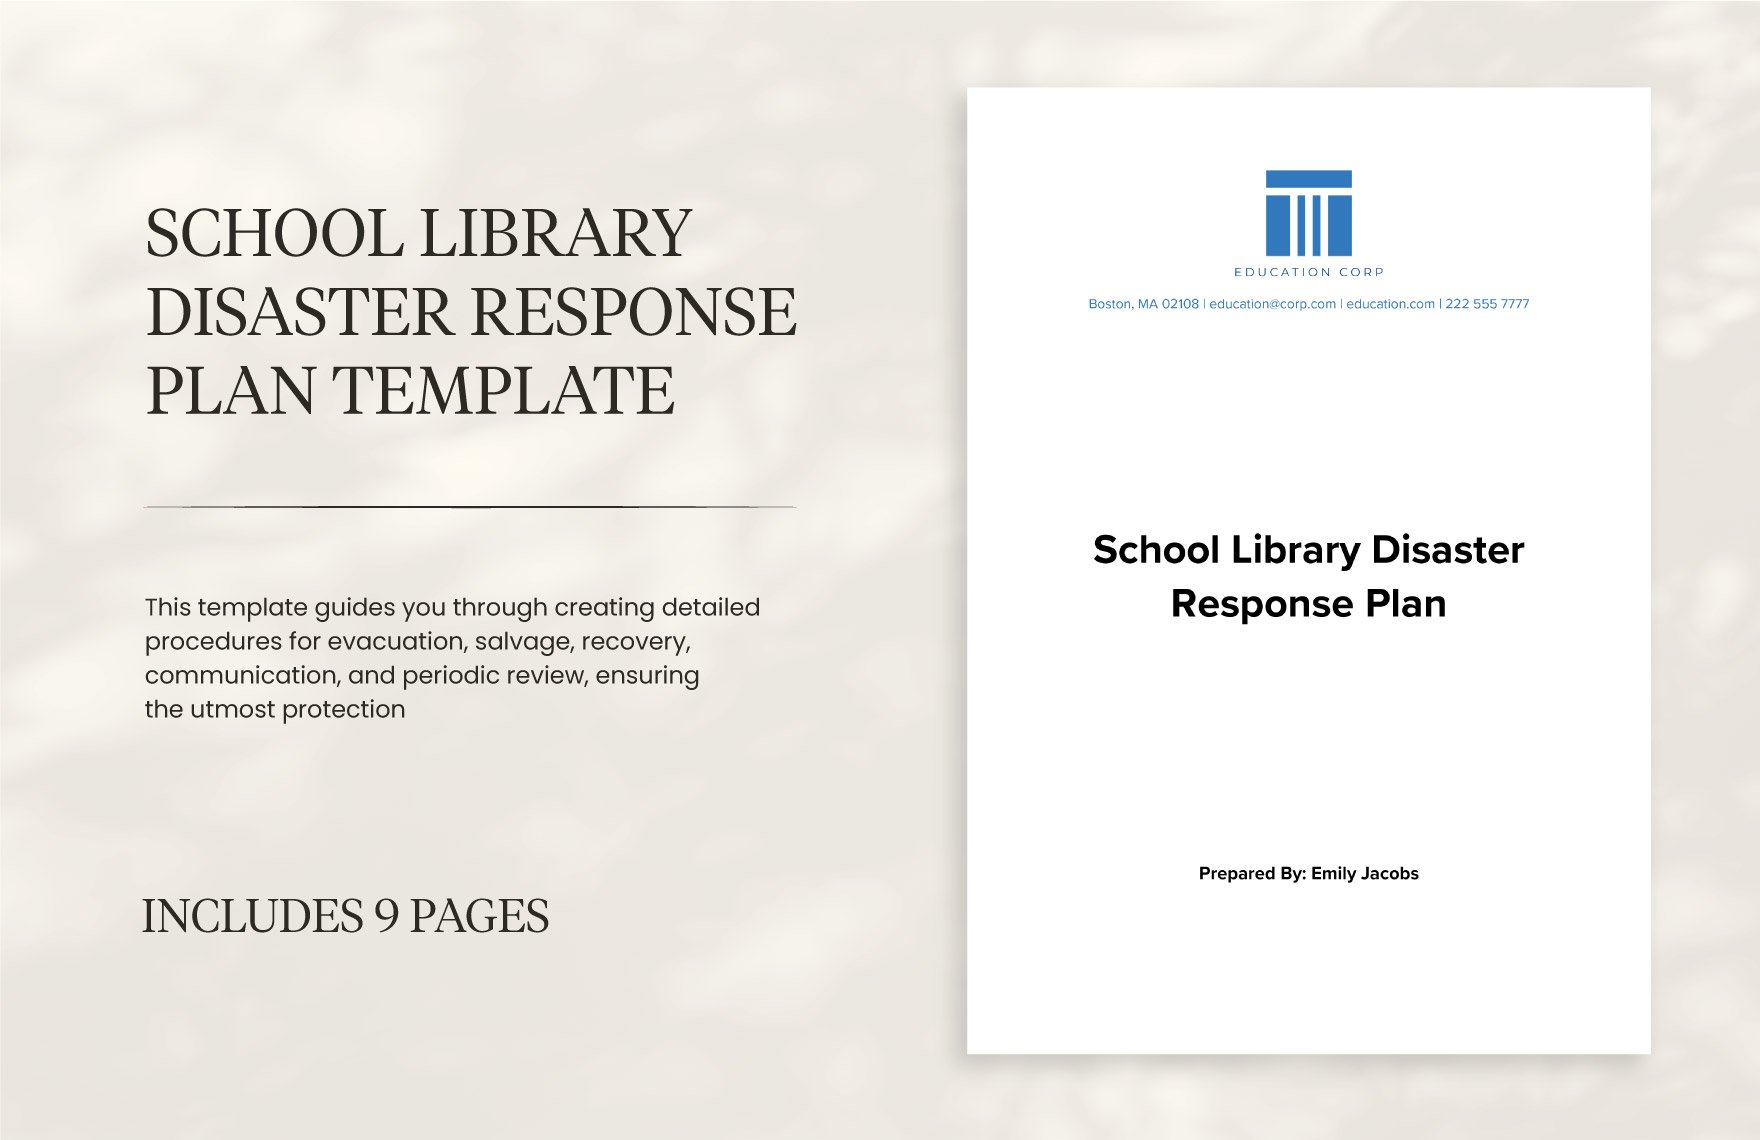 School Library Disaster Response Plan Template